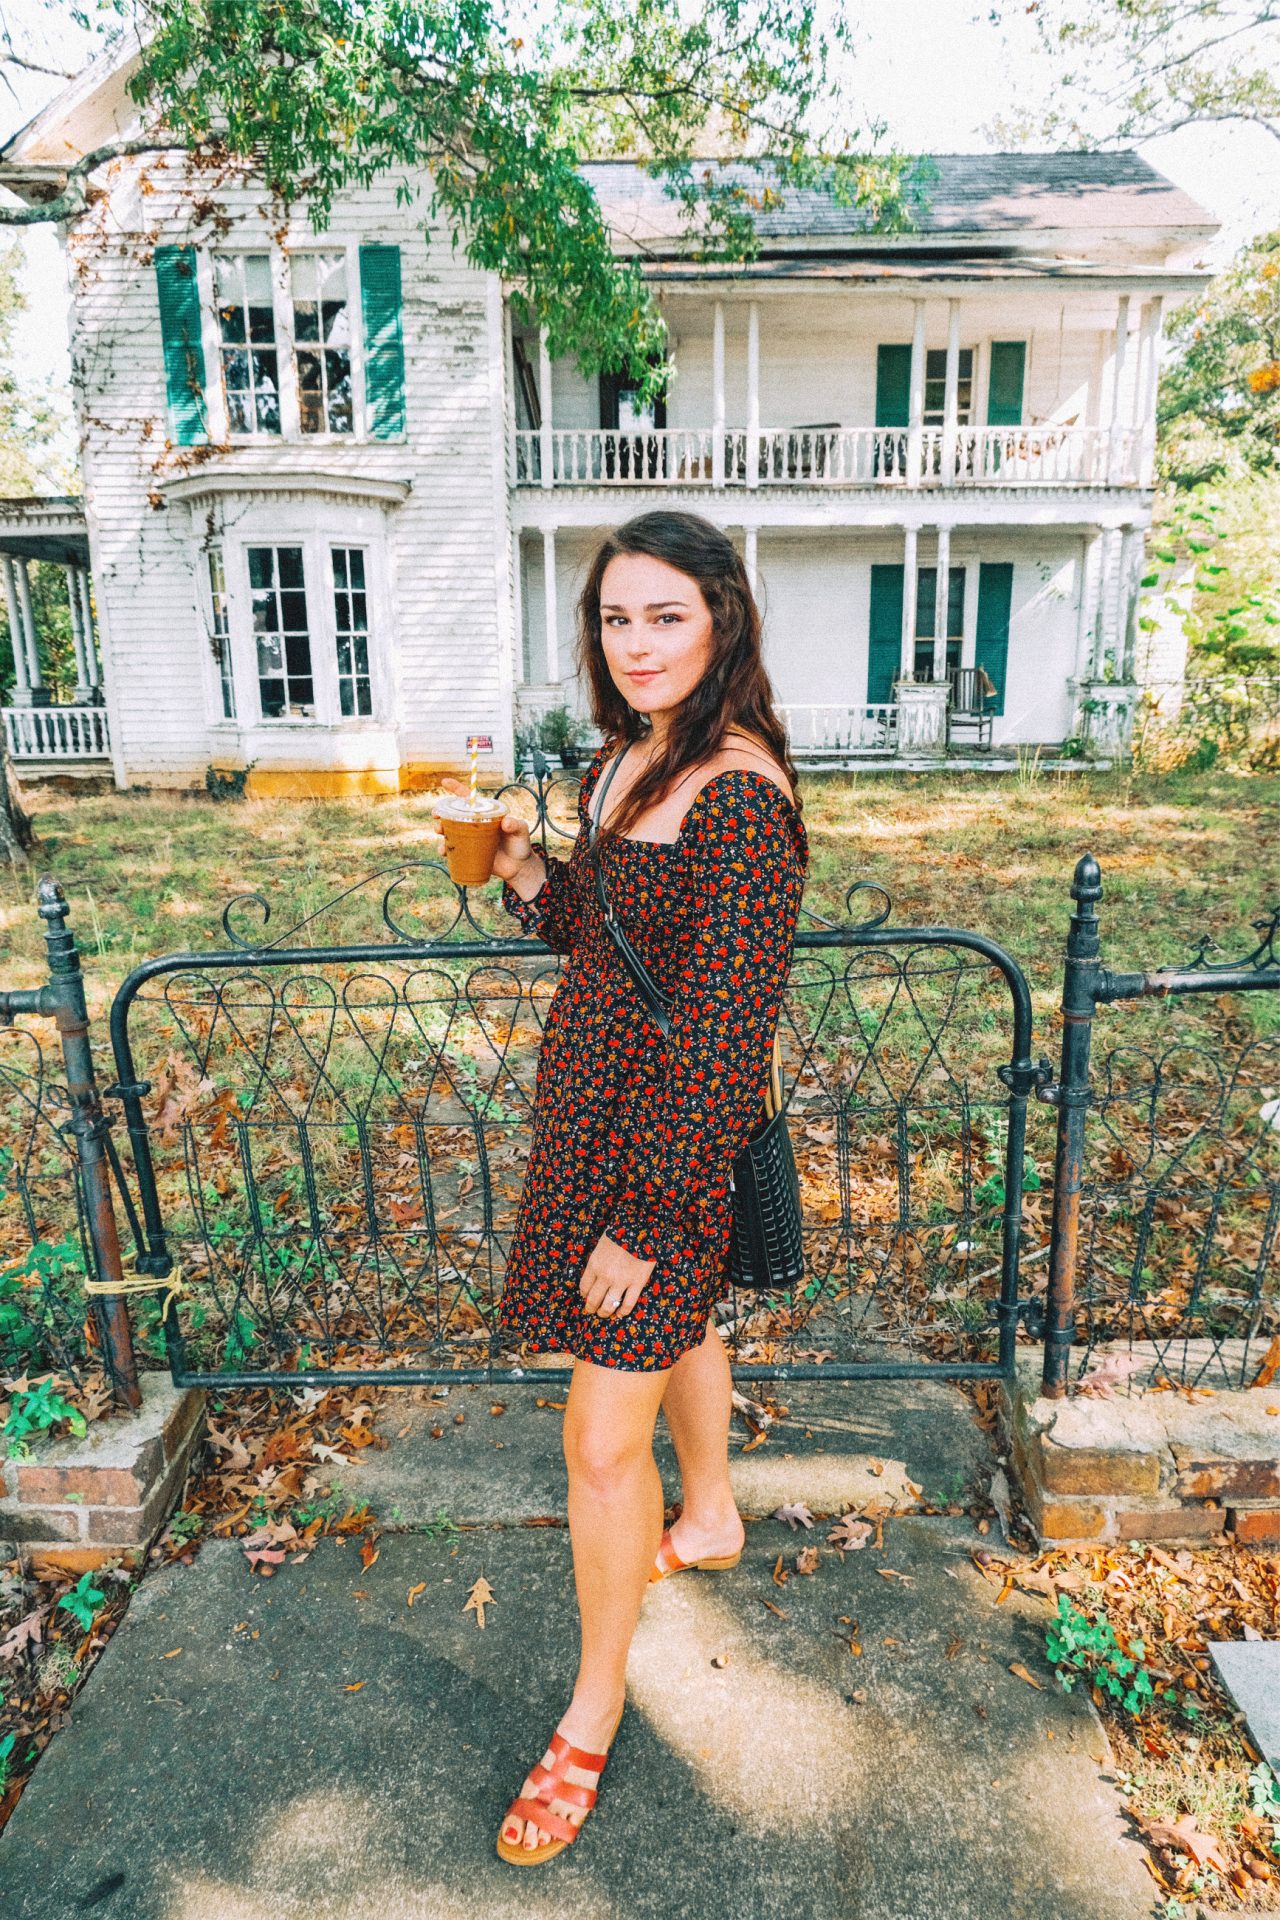 Waxhaw date, rose dress, fall in the south, coffee, provision, Waxhaw date, fun day, life, October, haunted house, halloween fall fashion